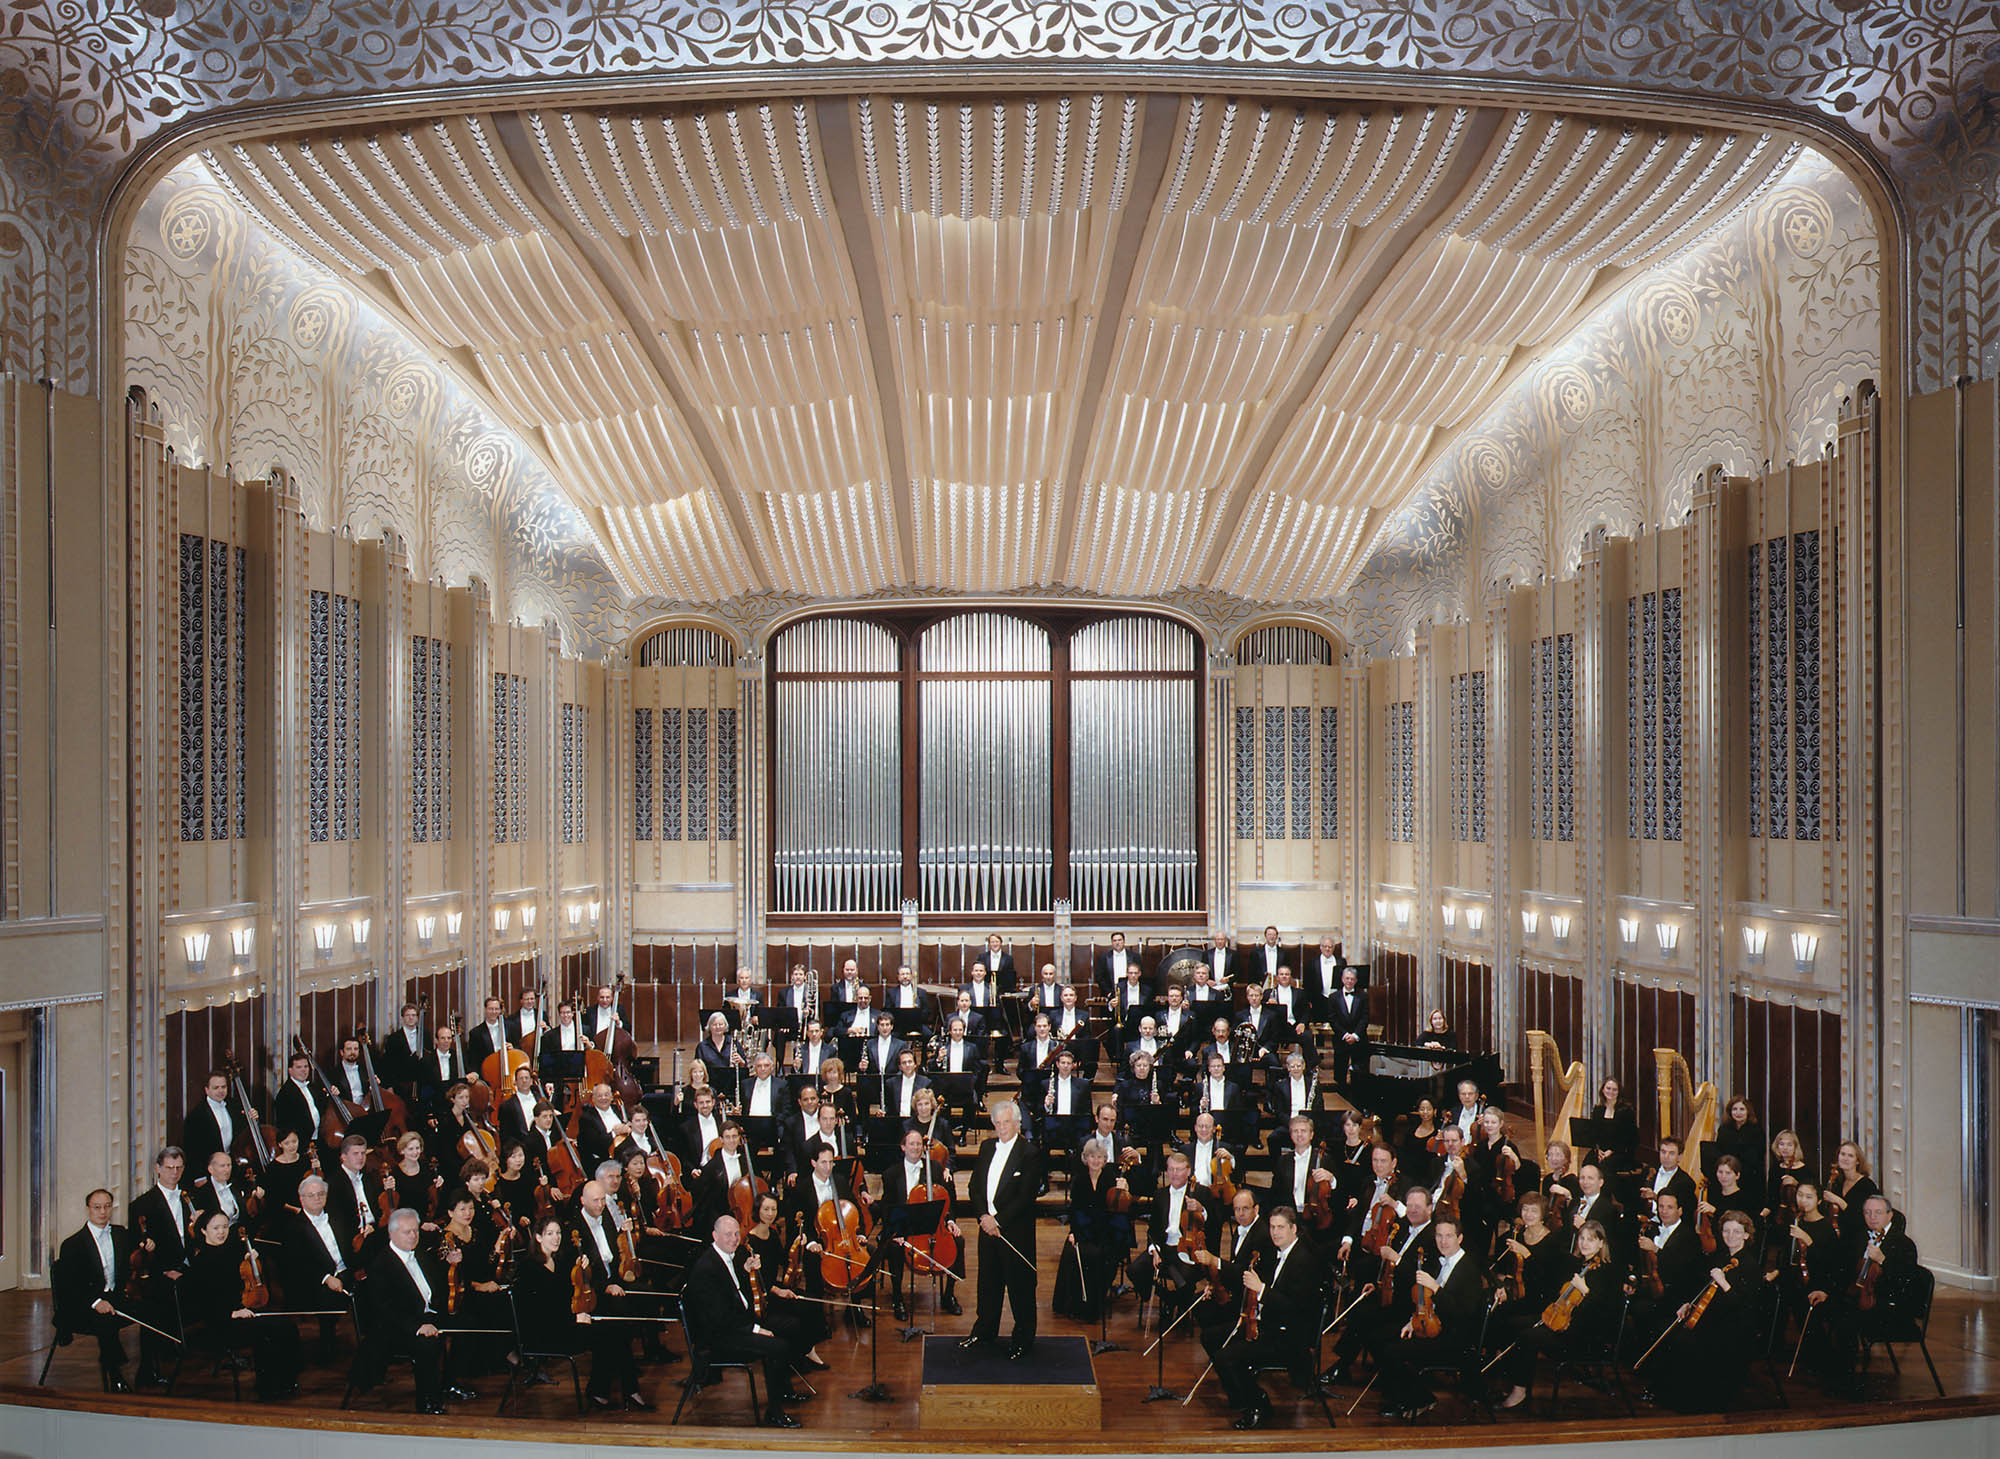 The Orchestra is seated on stage in Severance Hall, with von Dohnányi standing on the podium and looking towards the camera.  